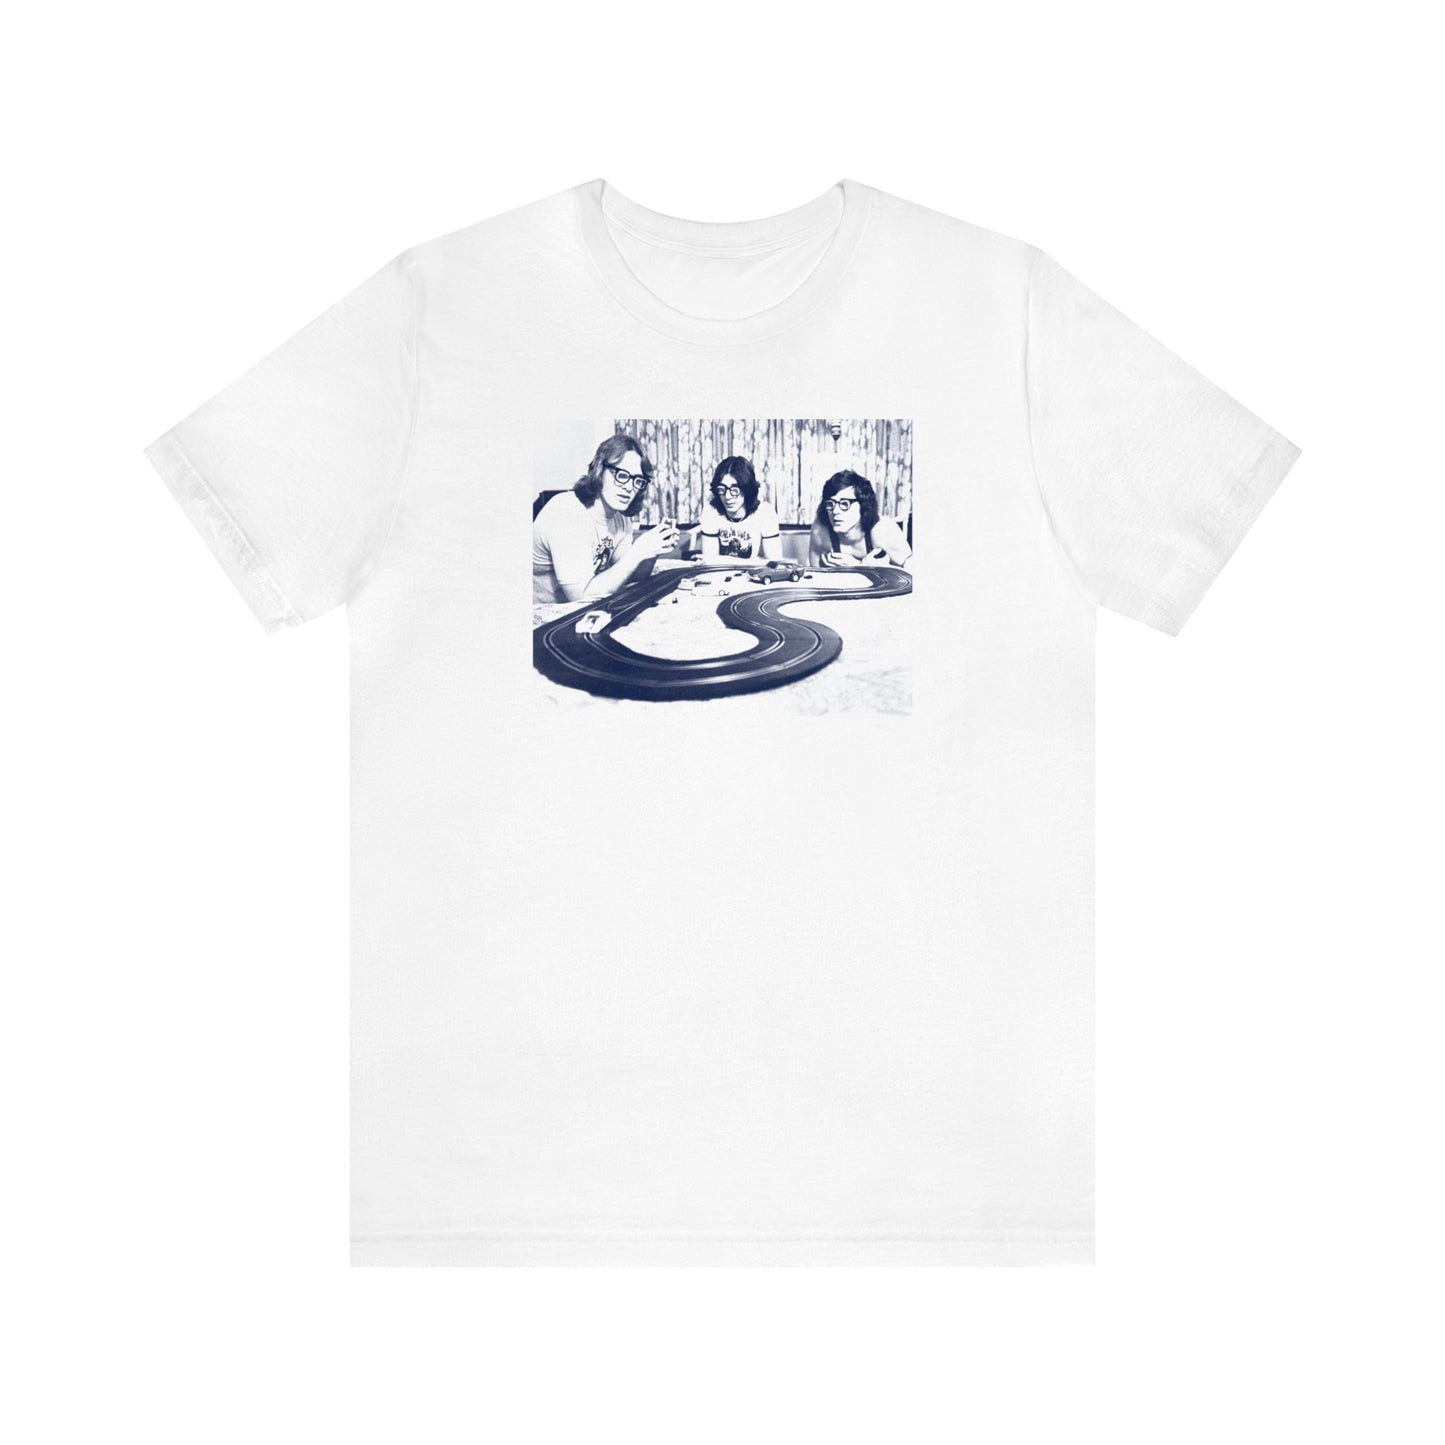 Slap Shot - They Brought Their F#ckin Toys Shirt